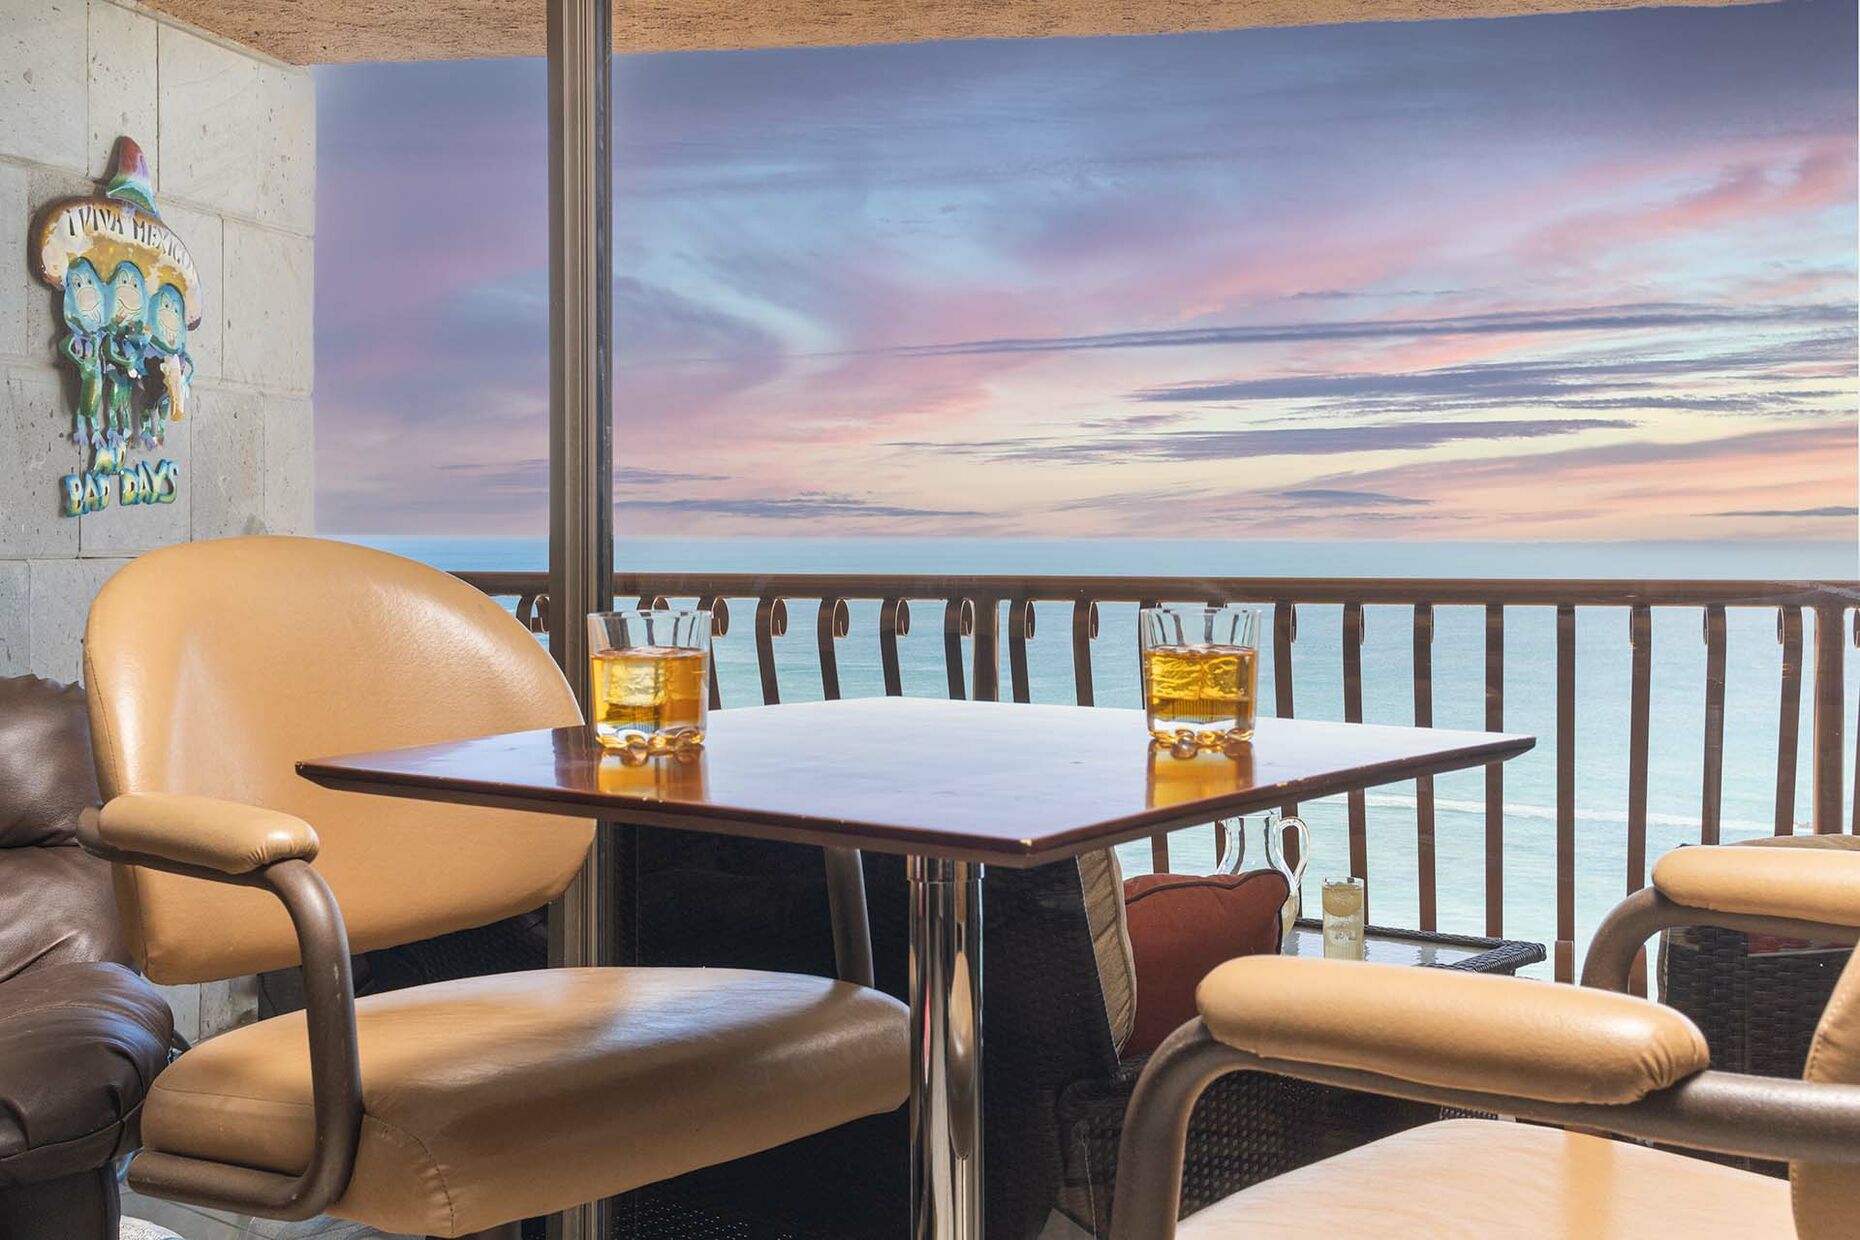 Bistro table makes the most of the view.